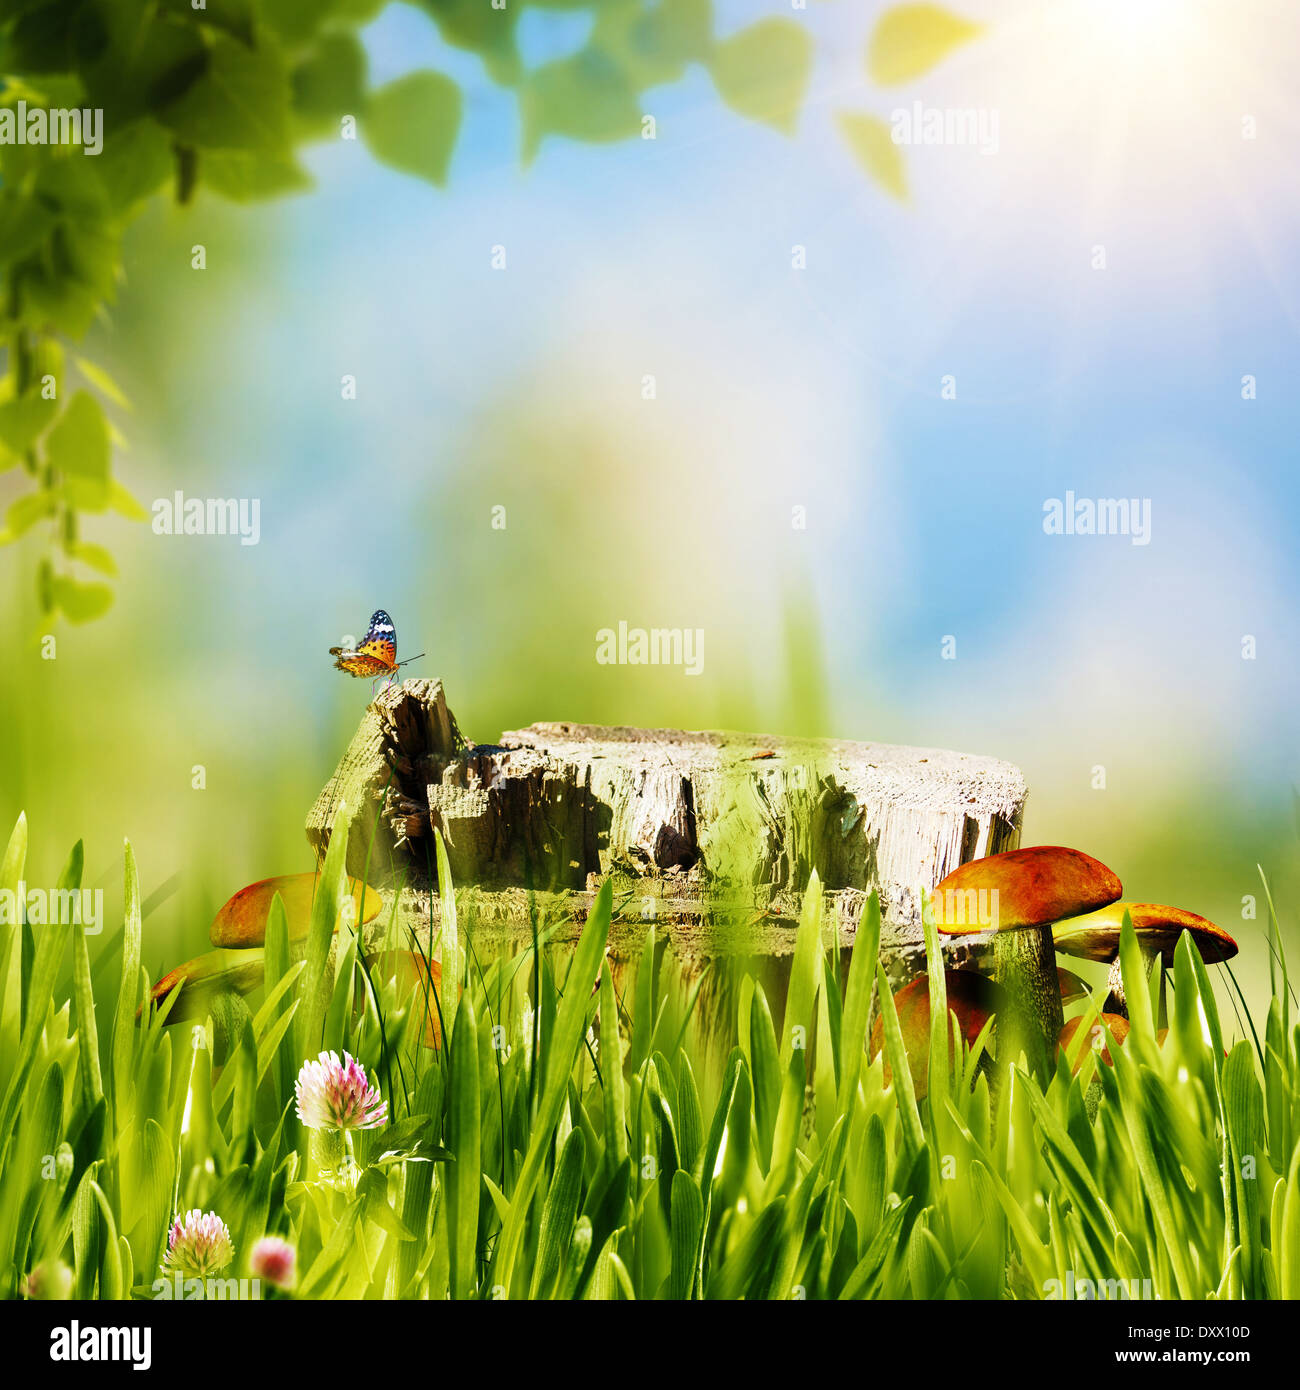 Abstract natural backgrounds with green grass, mushrooms, etc under bright  sun Stock Photo - Alamy